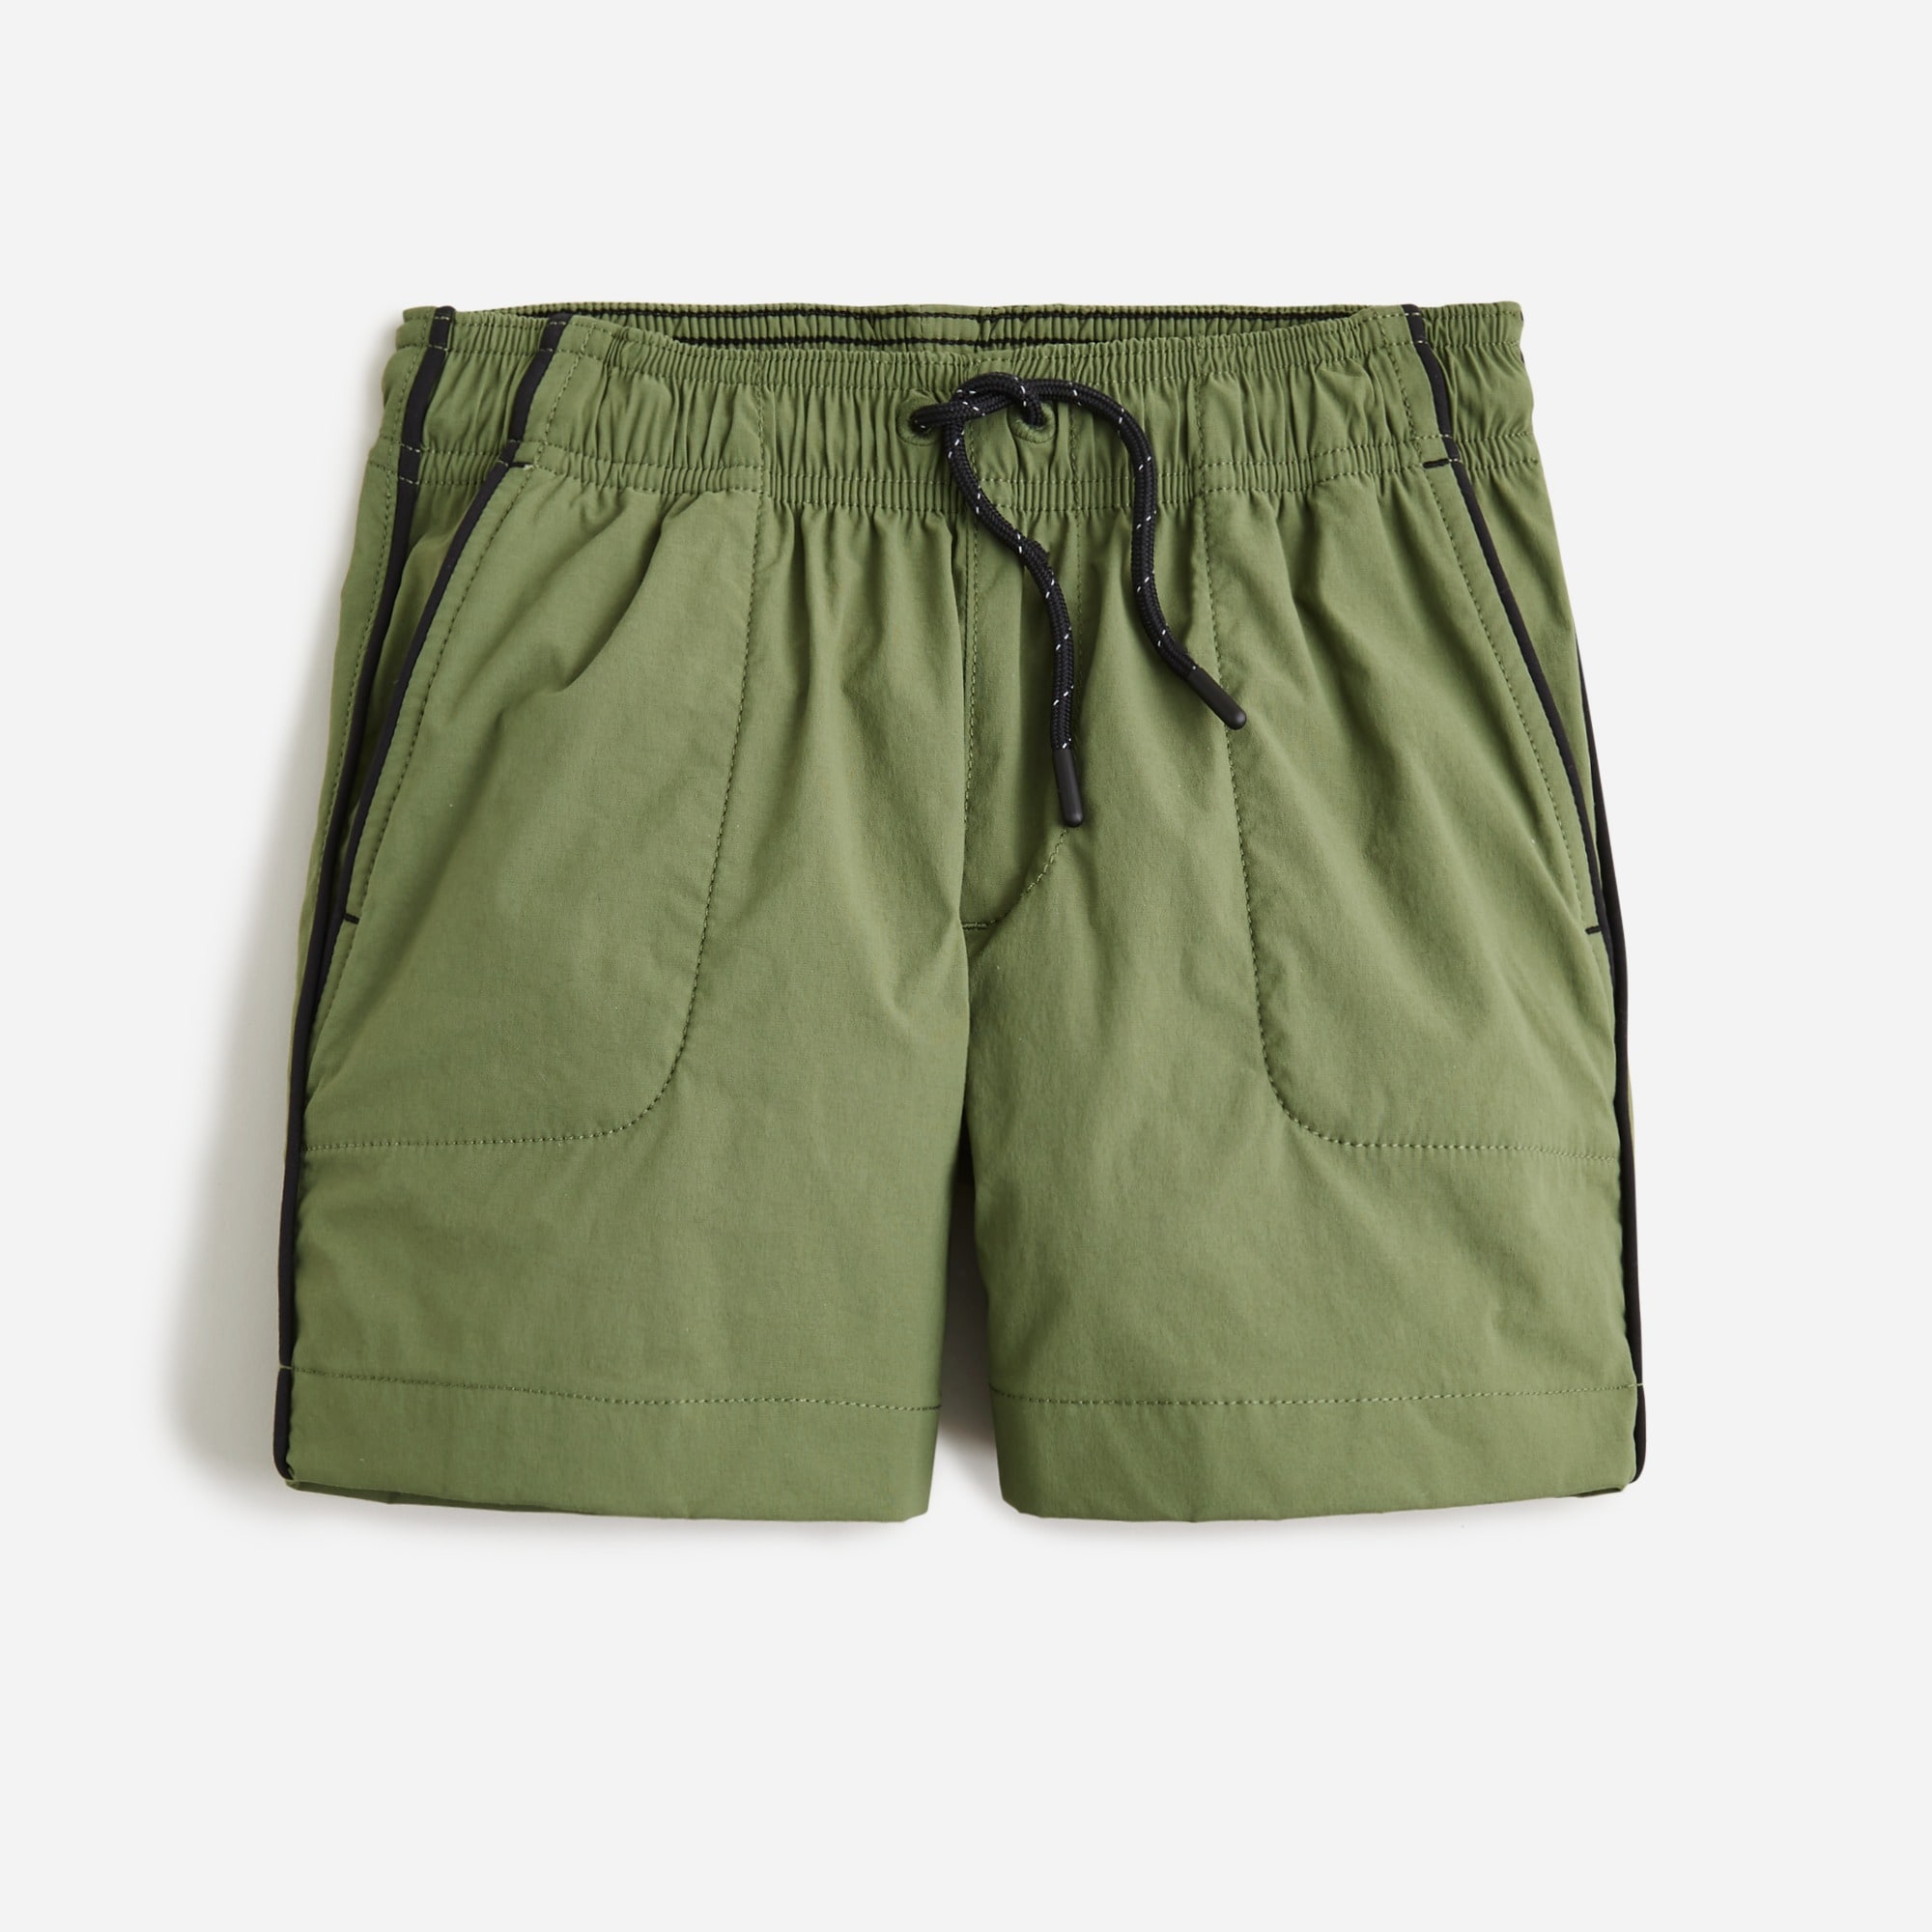 boys Boys' active dock short with piping